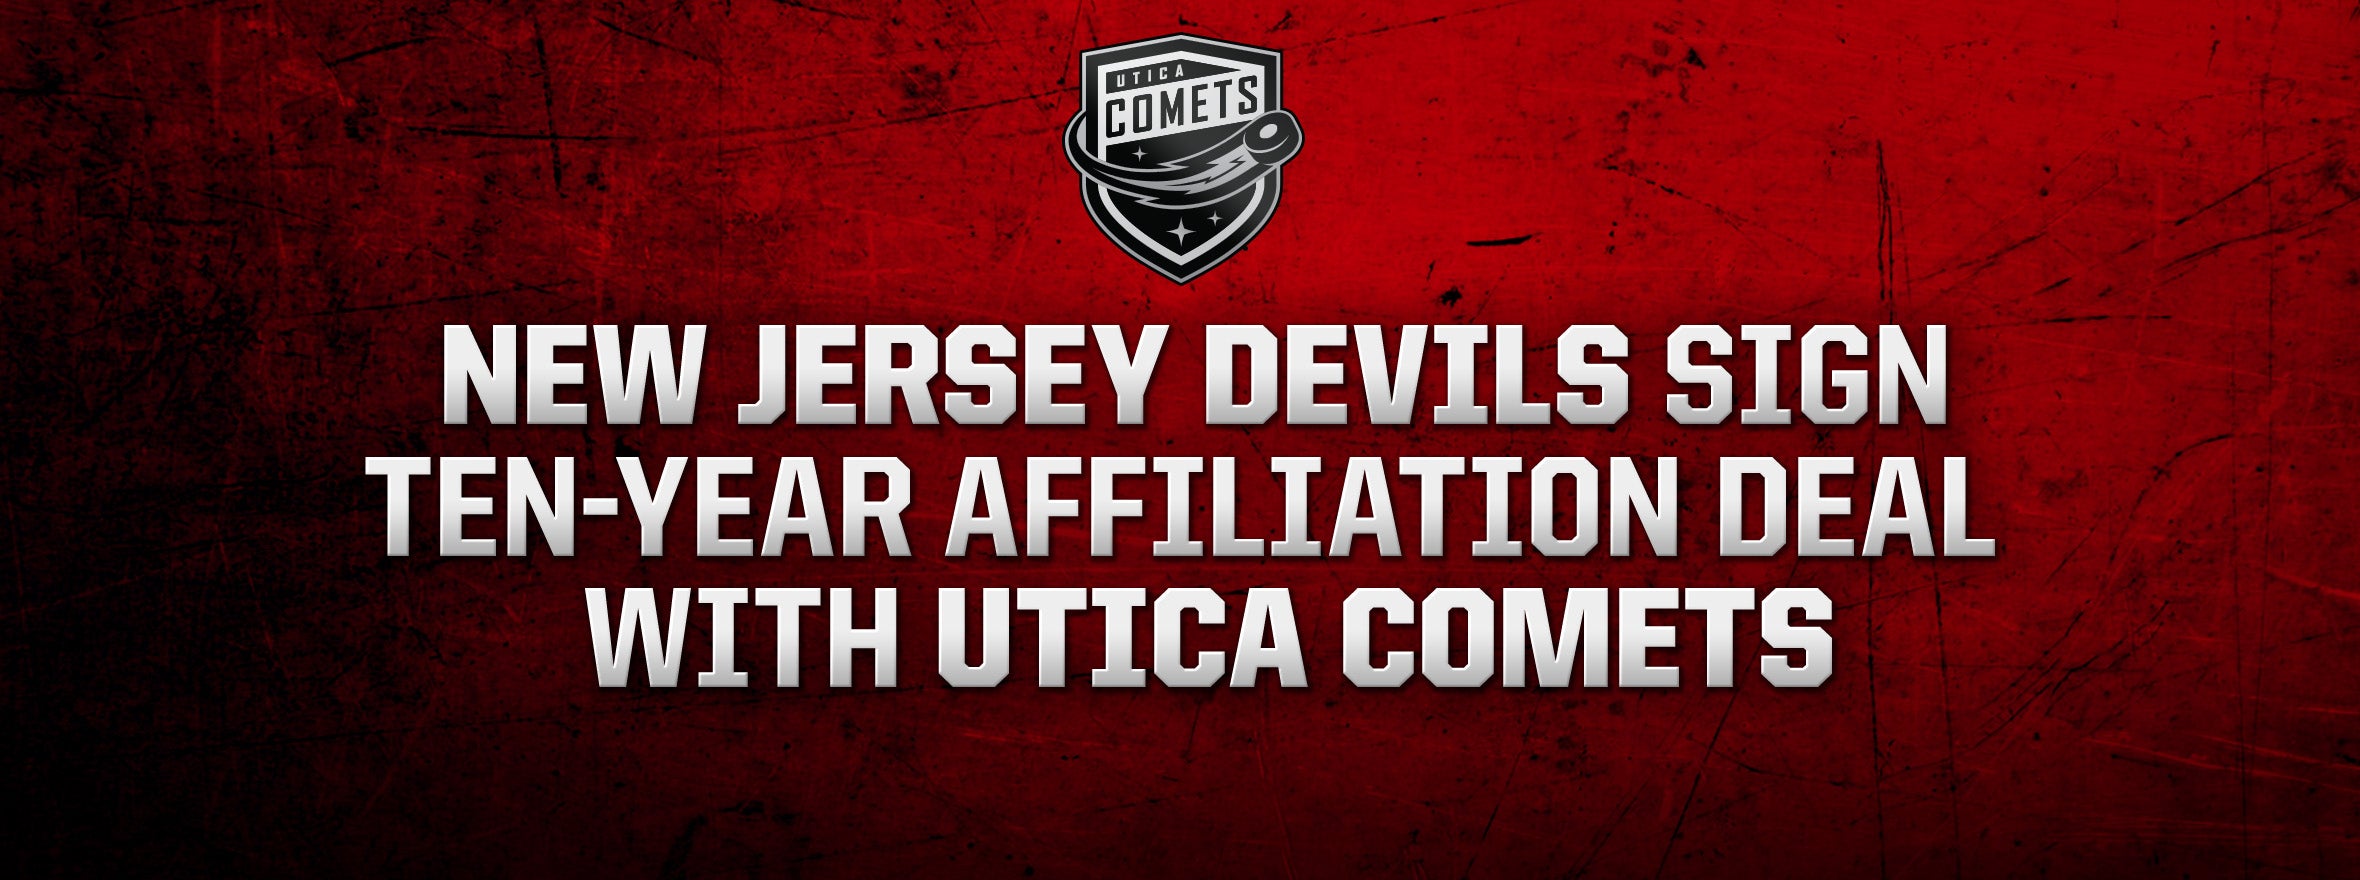 Utica Comets Agree to 10-Year Affiliation With New Jersey Devils AHL